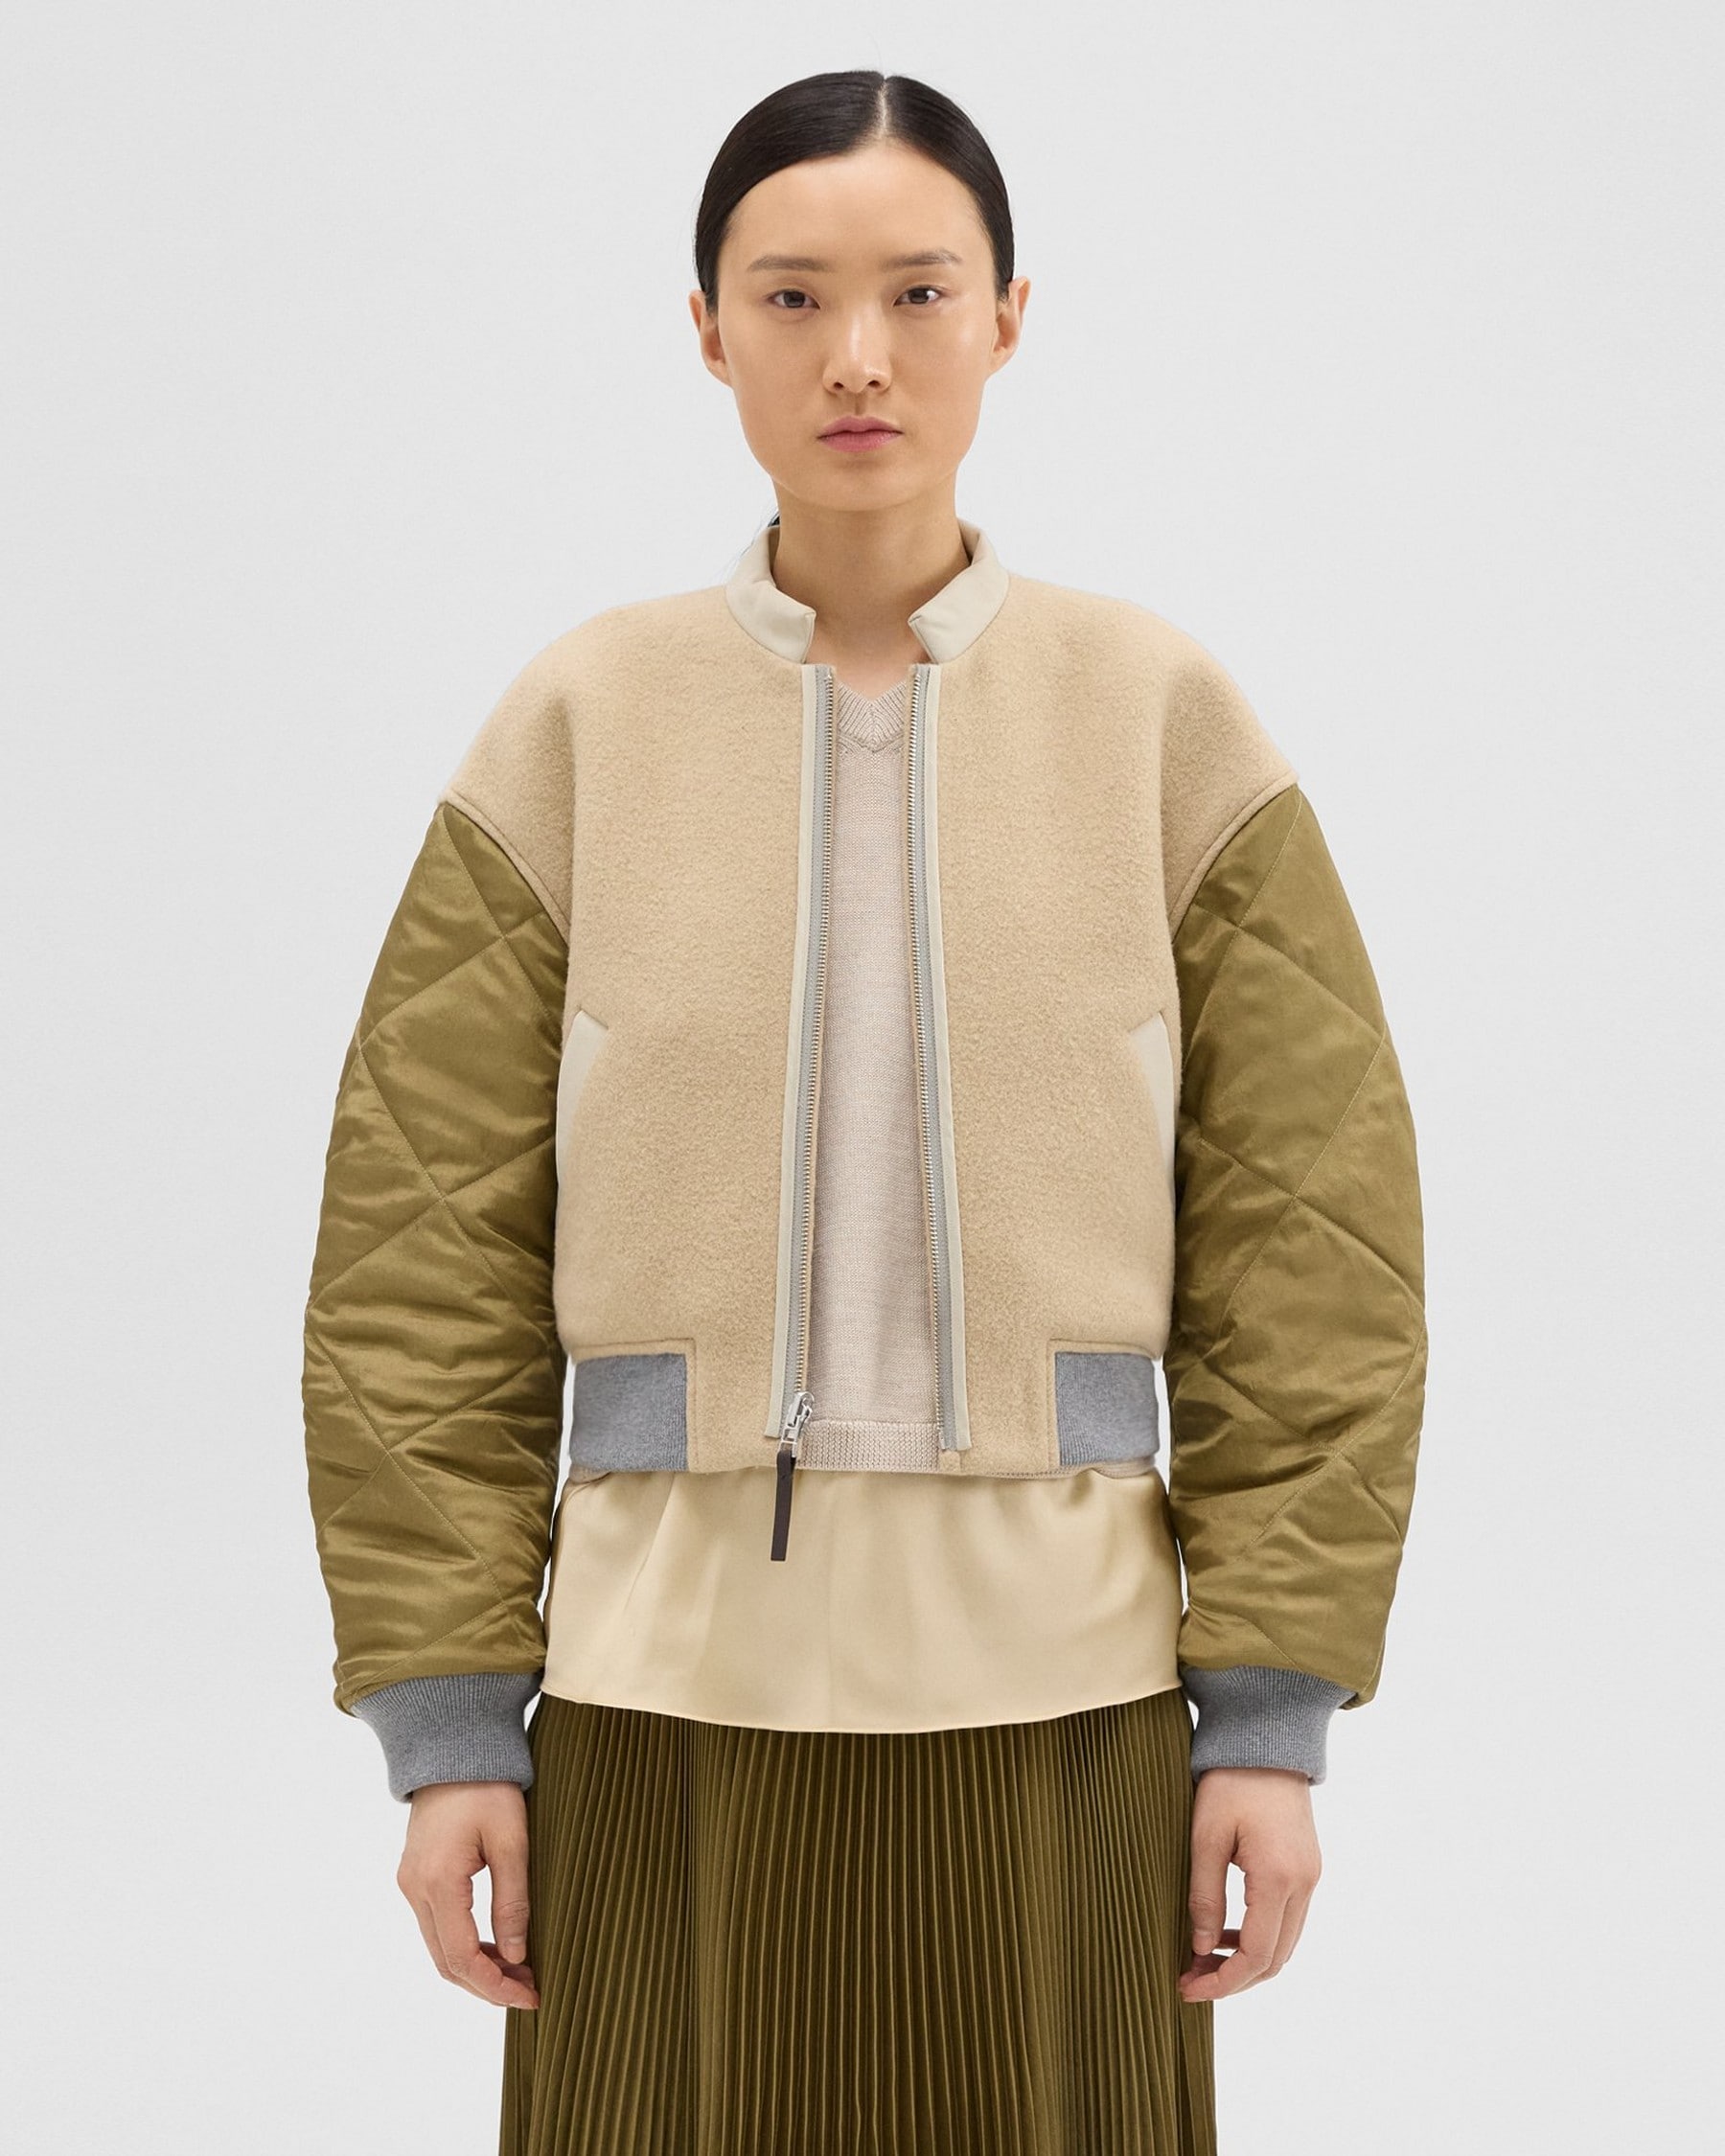 Theory Recycled Poly Reversible Bomber Jacket